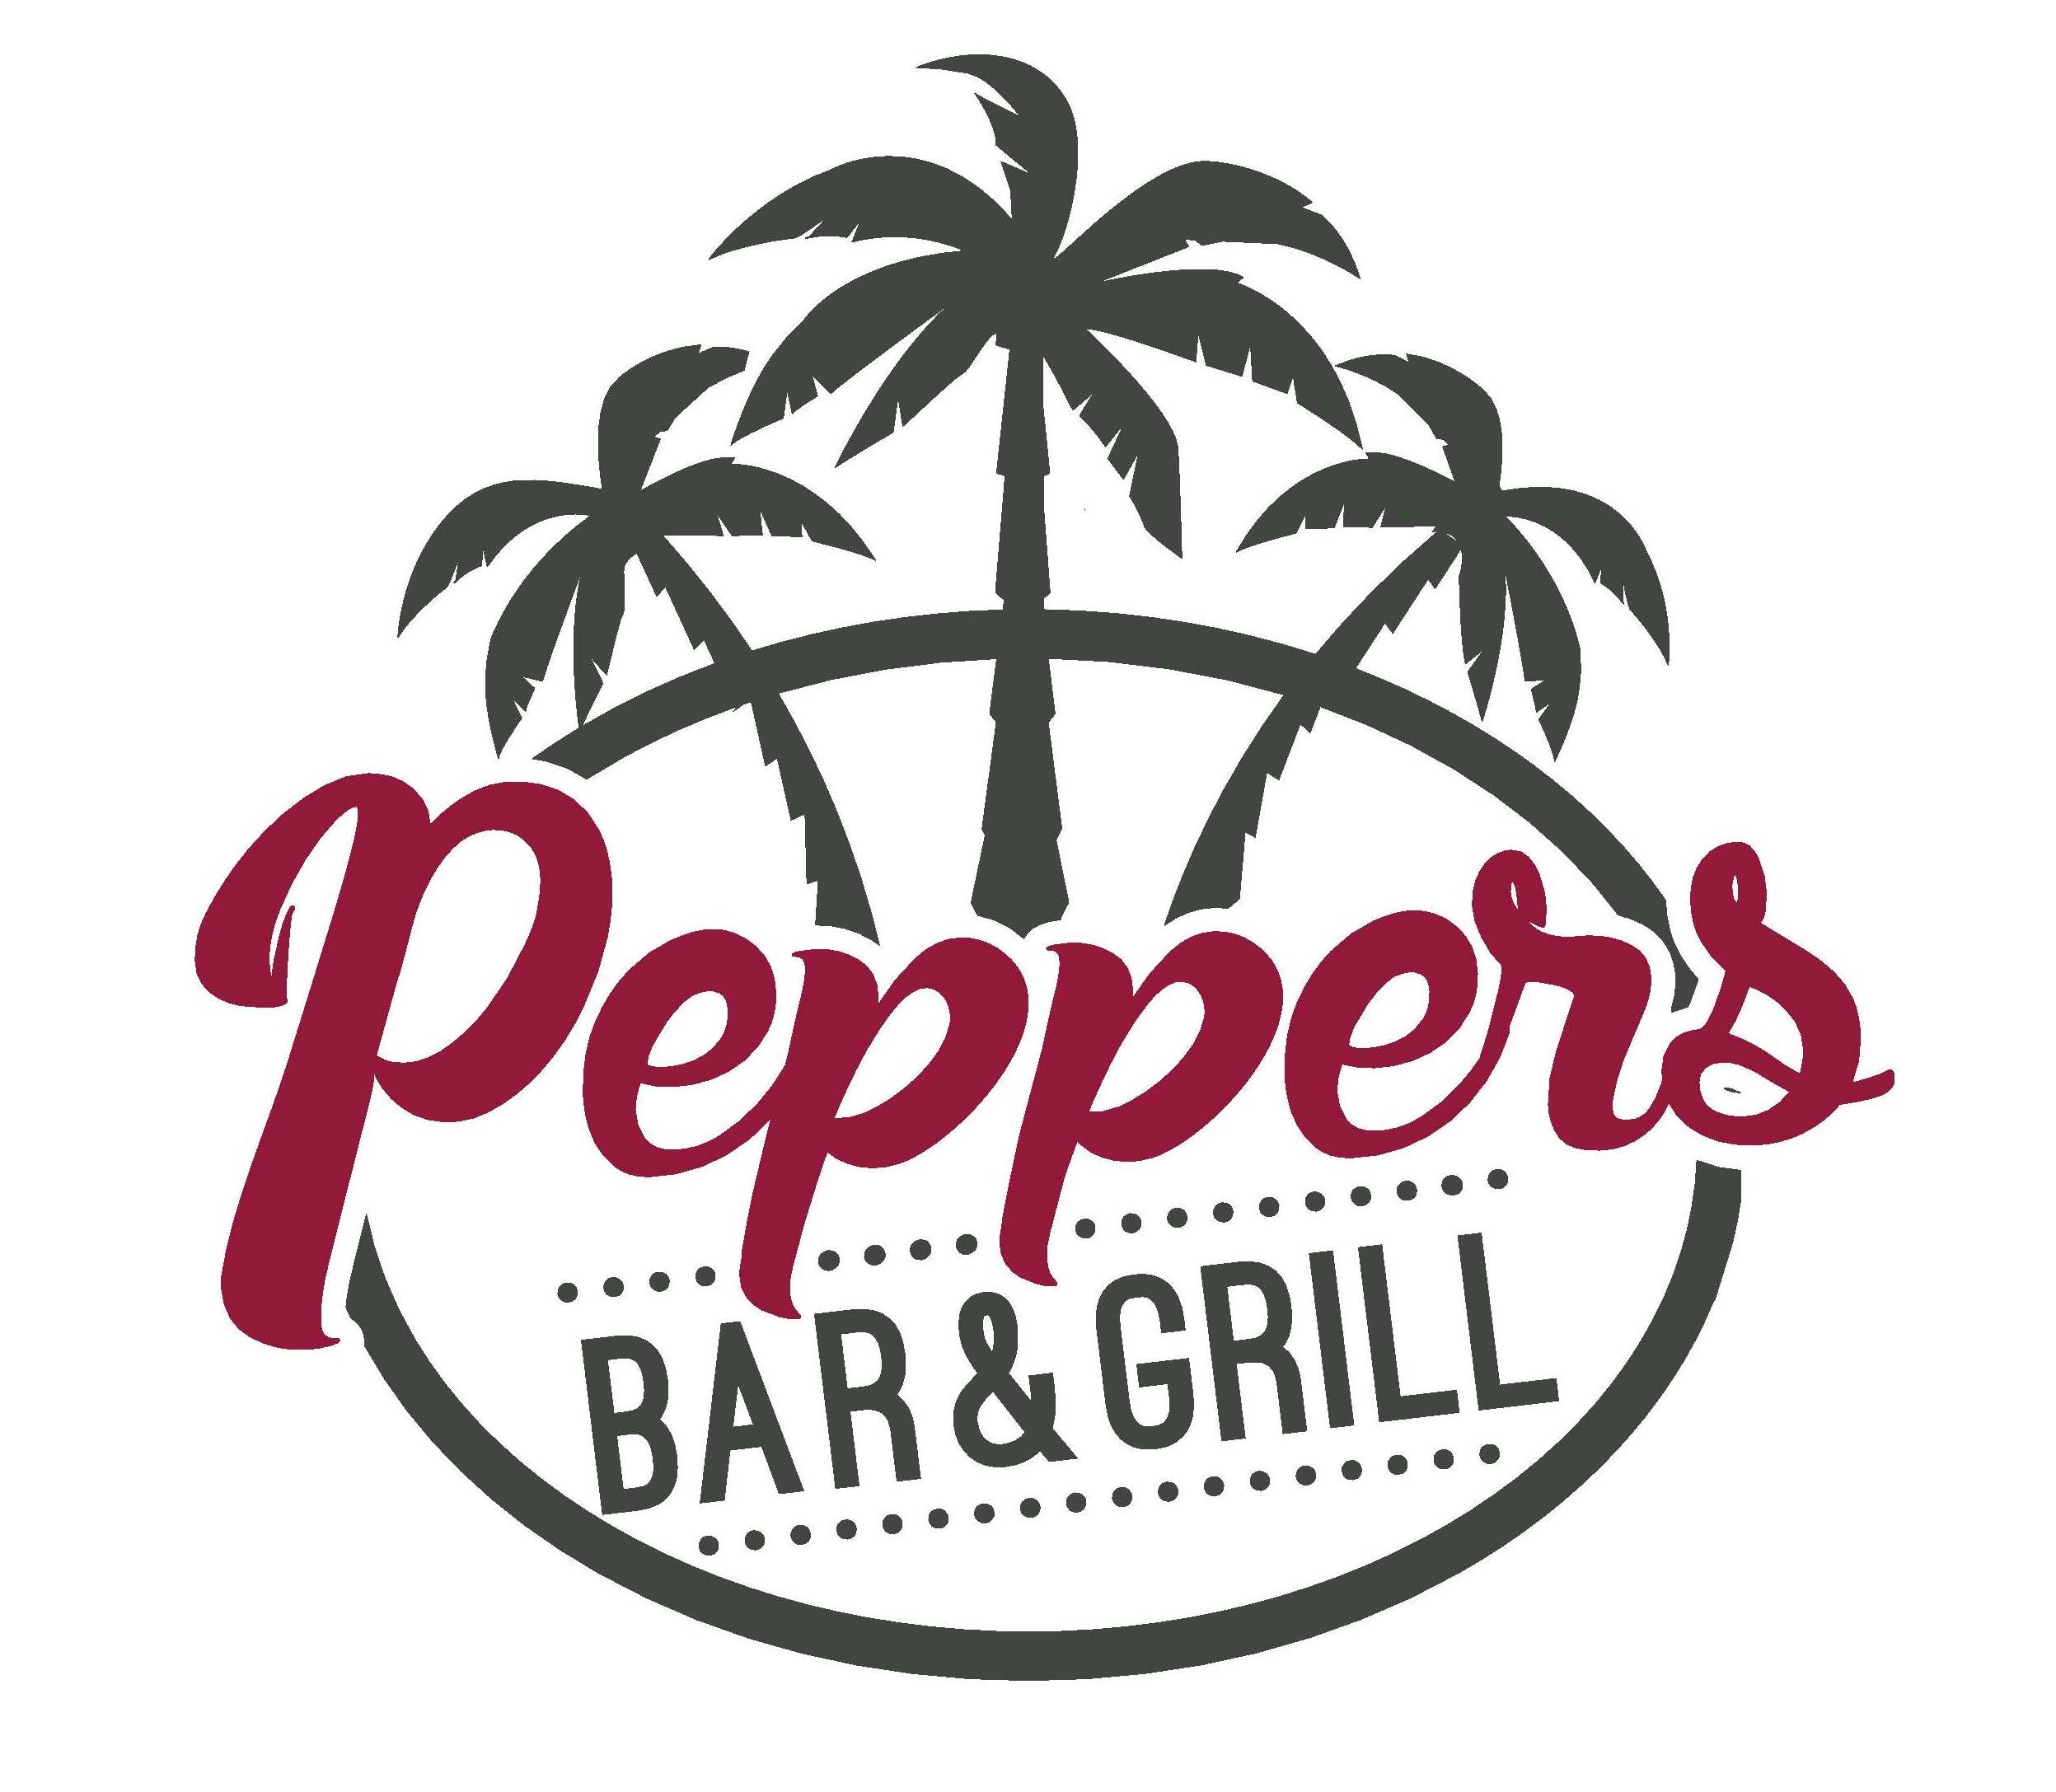 Peppers Bar & Grill